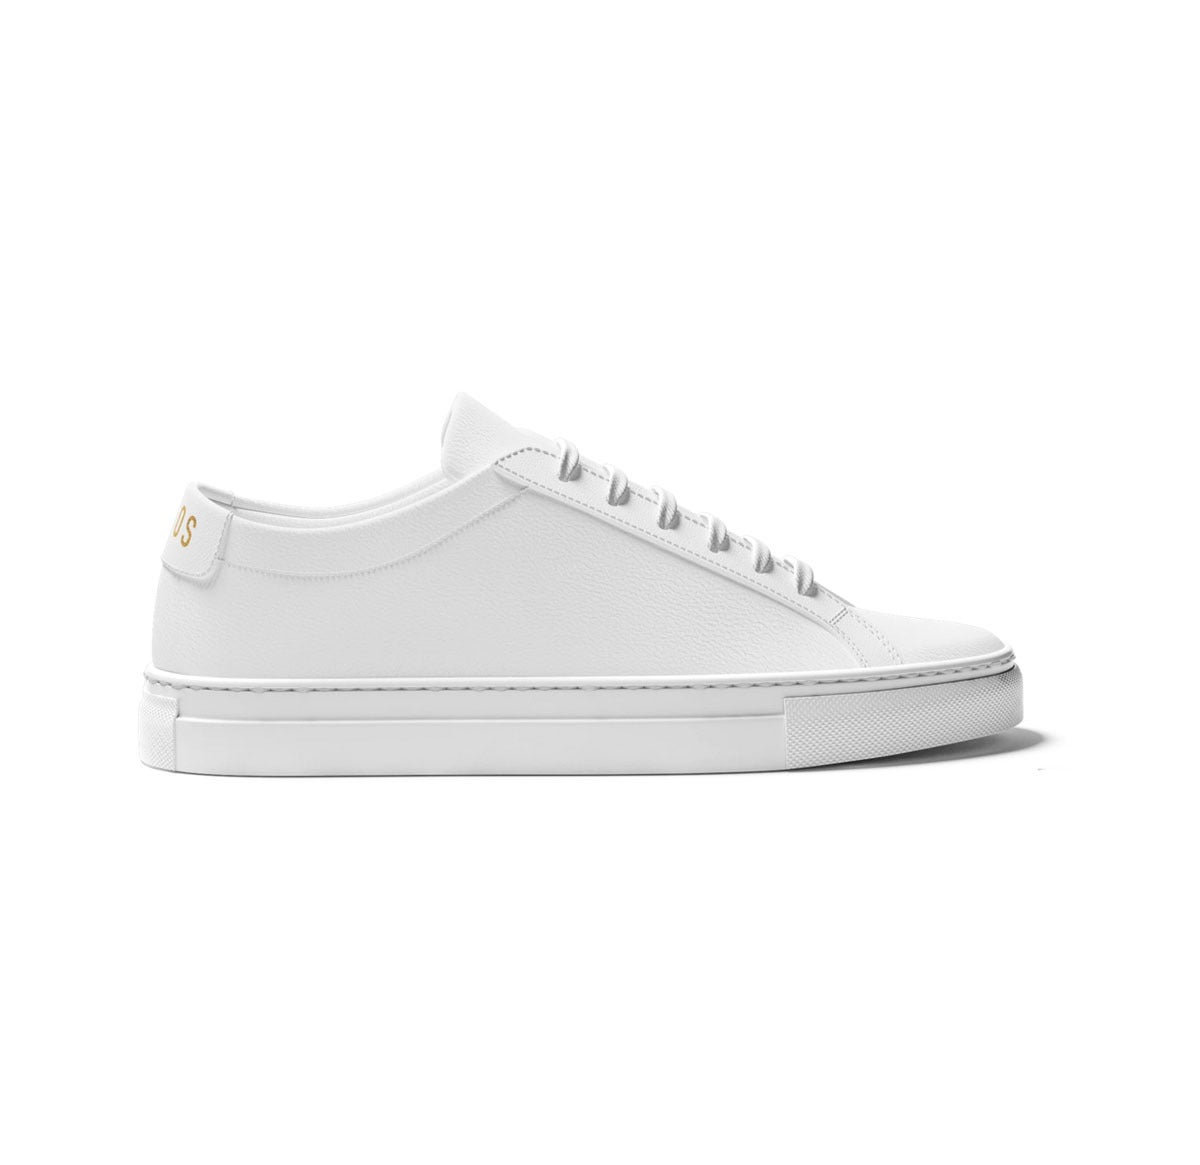 Sobos Limited Edition 405 Classic Low in White - SWAGGER Magazine